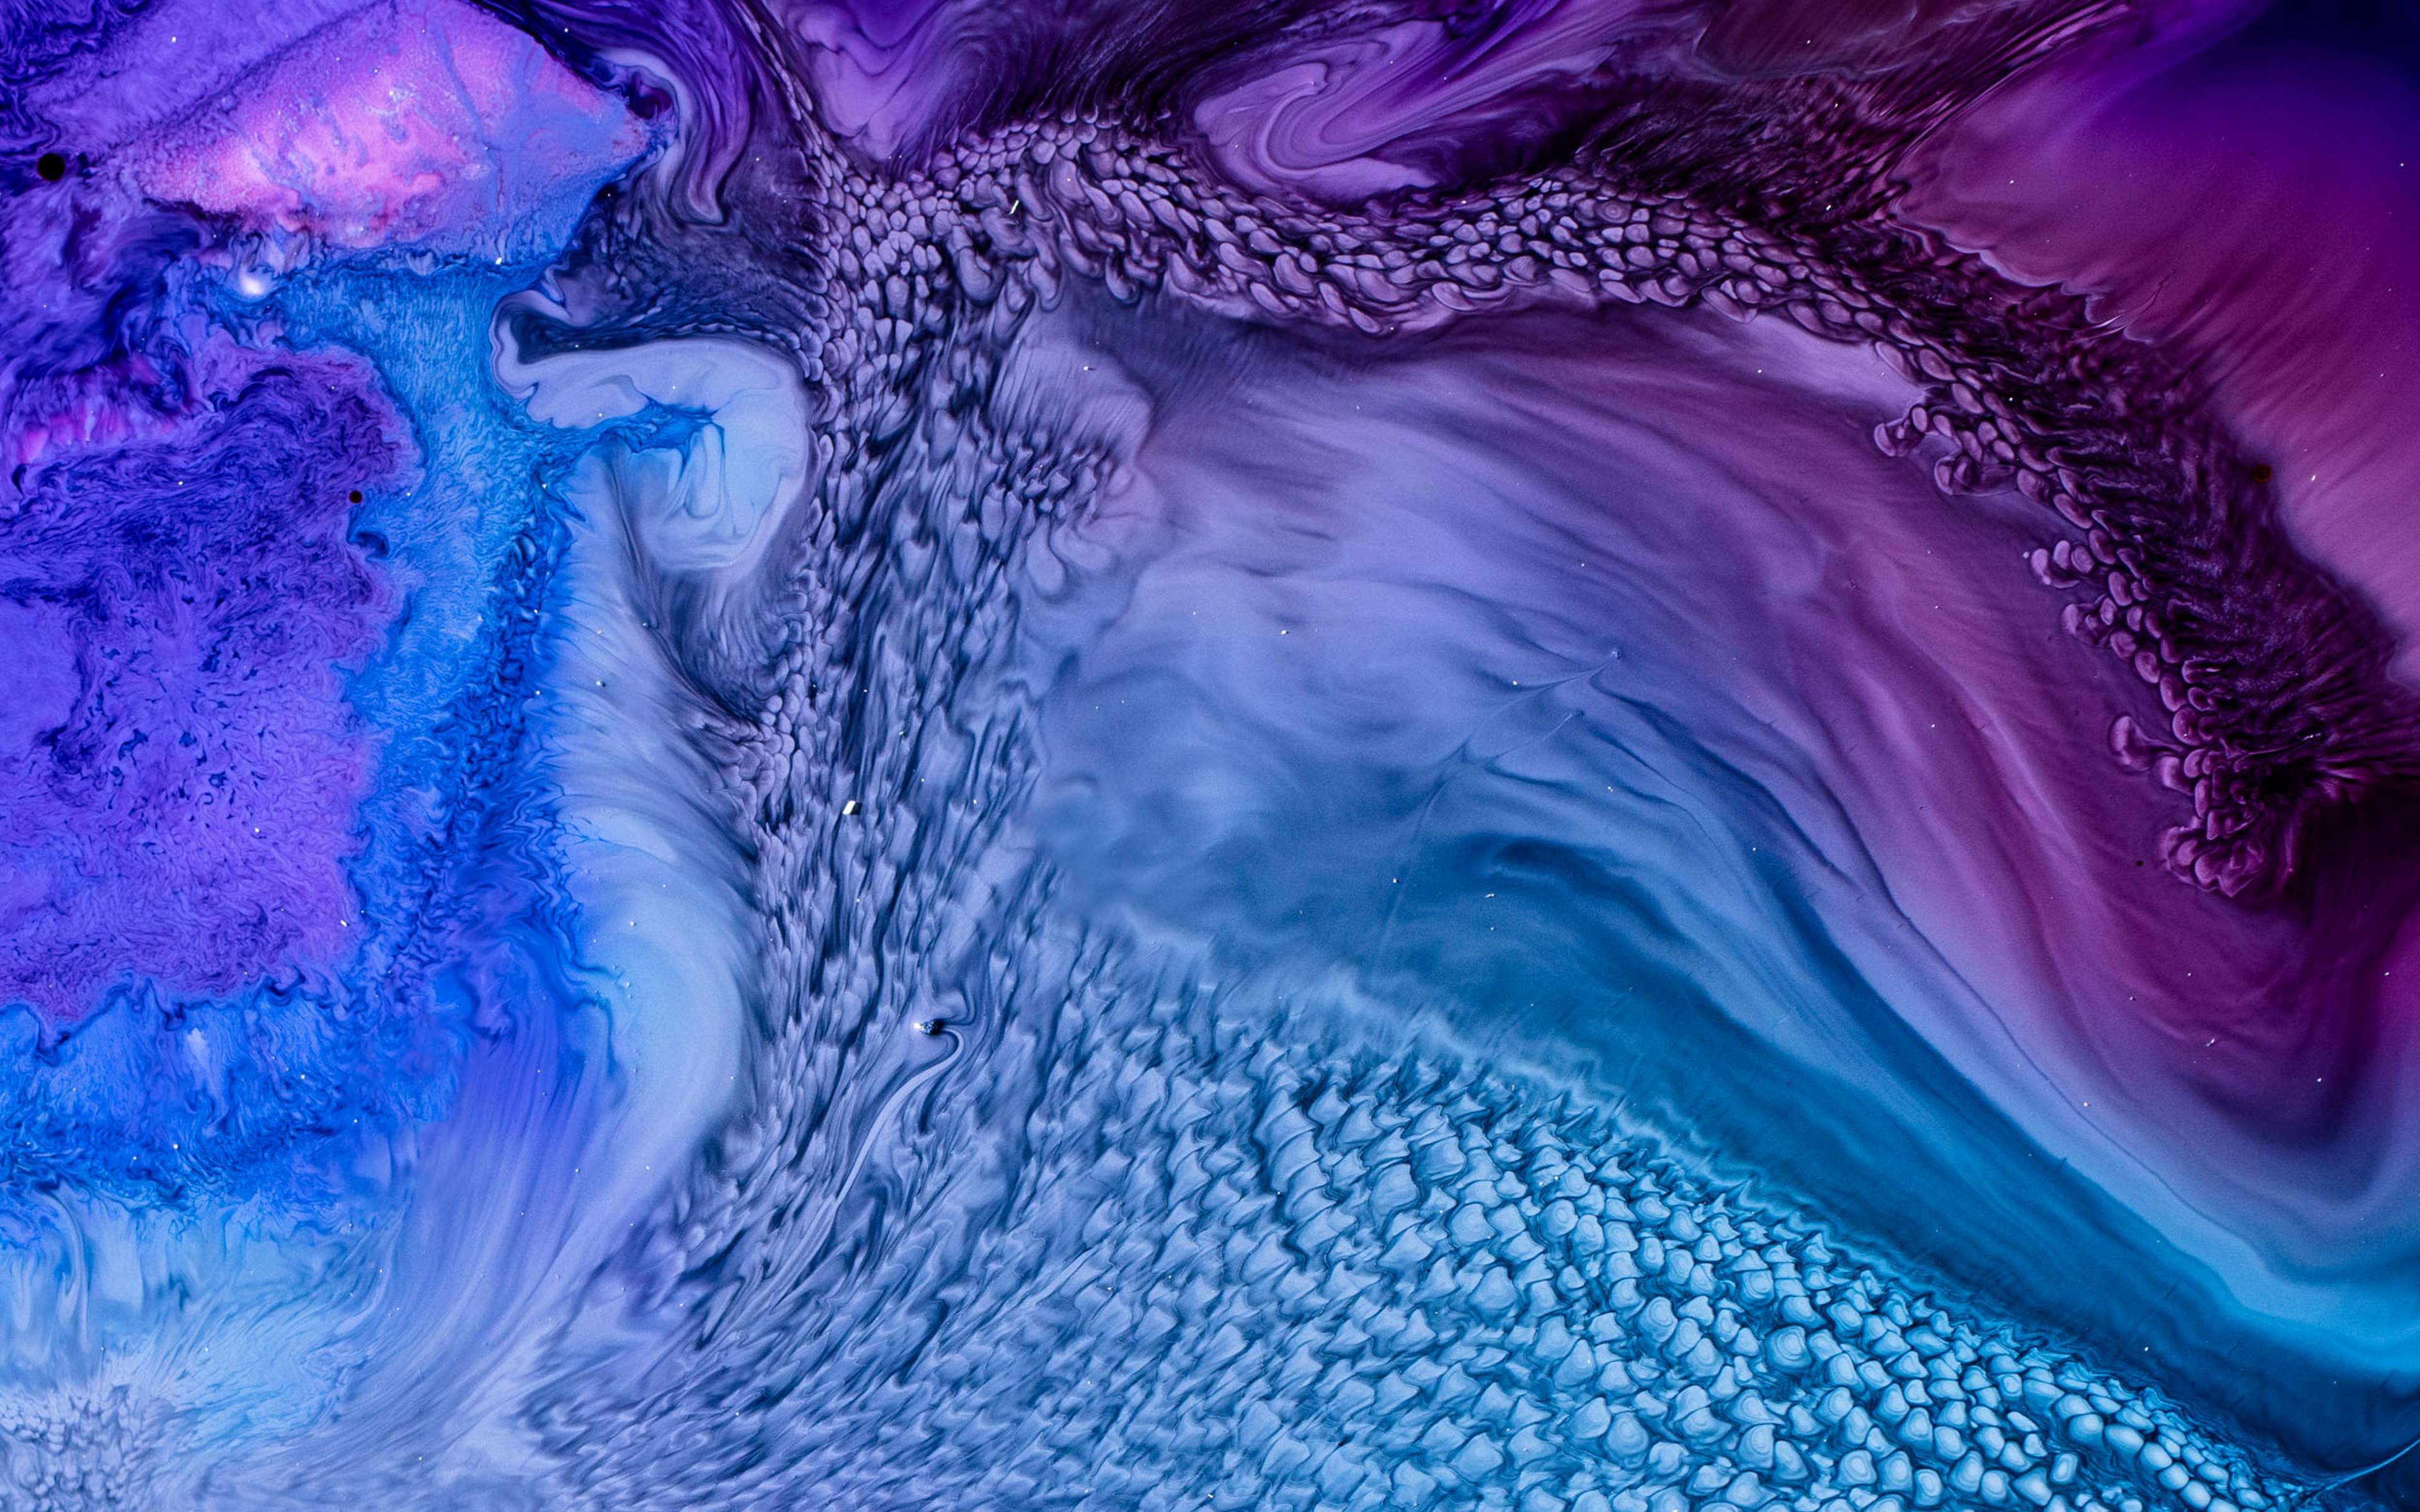 Close up shot of abstract patterns made out of liquid ink.